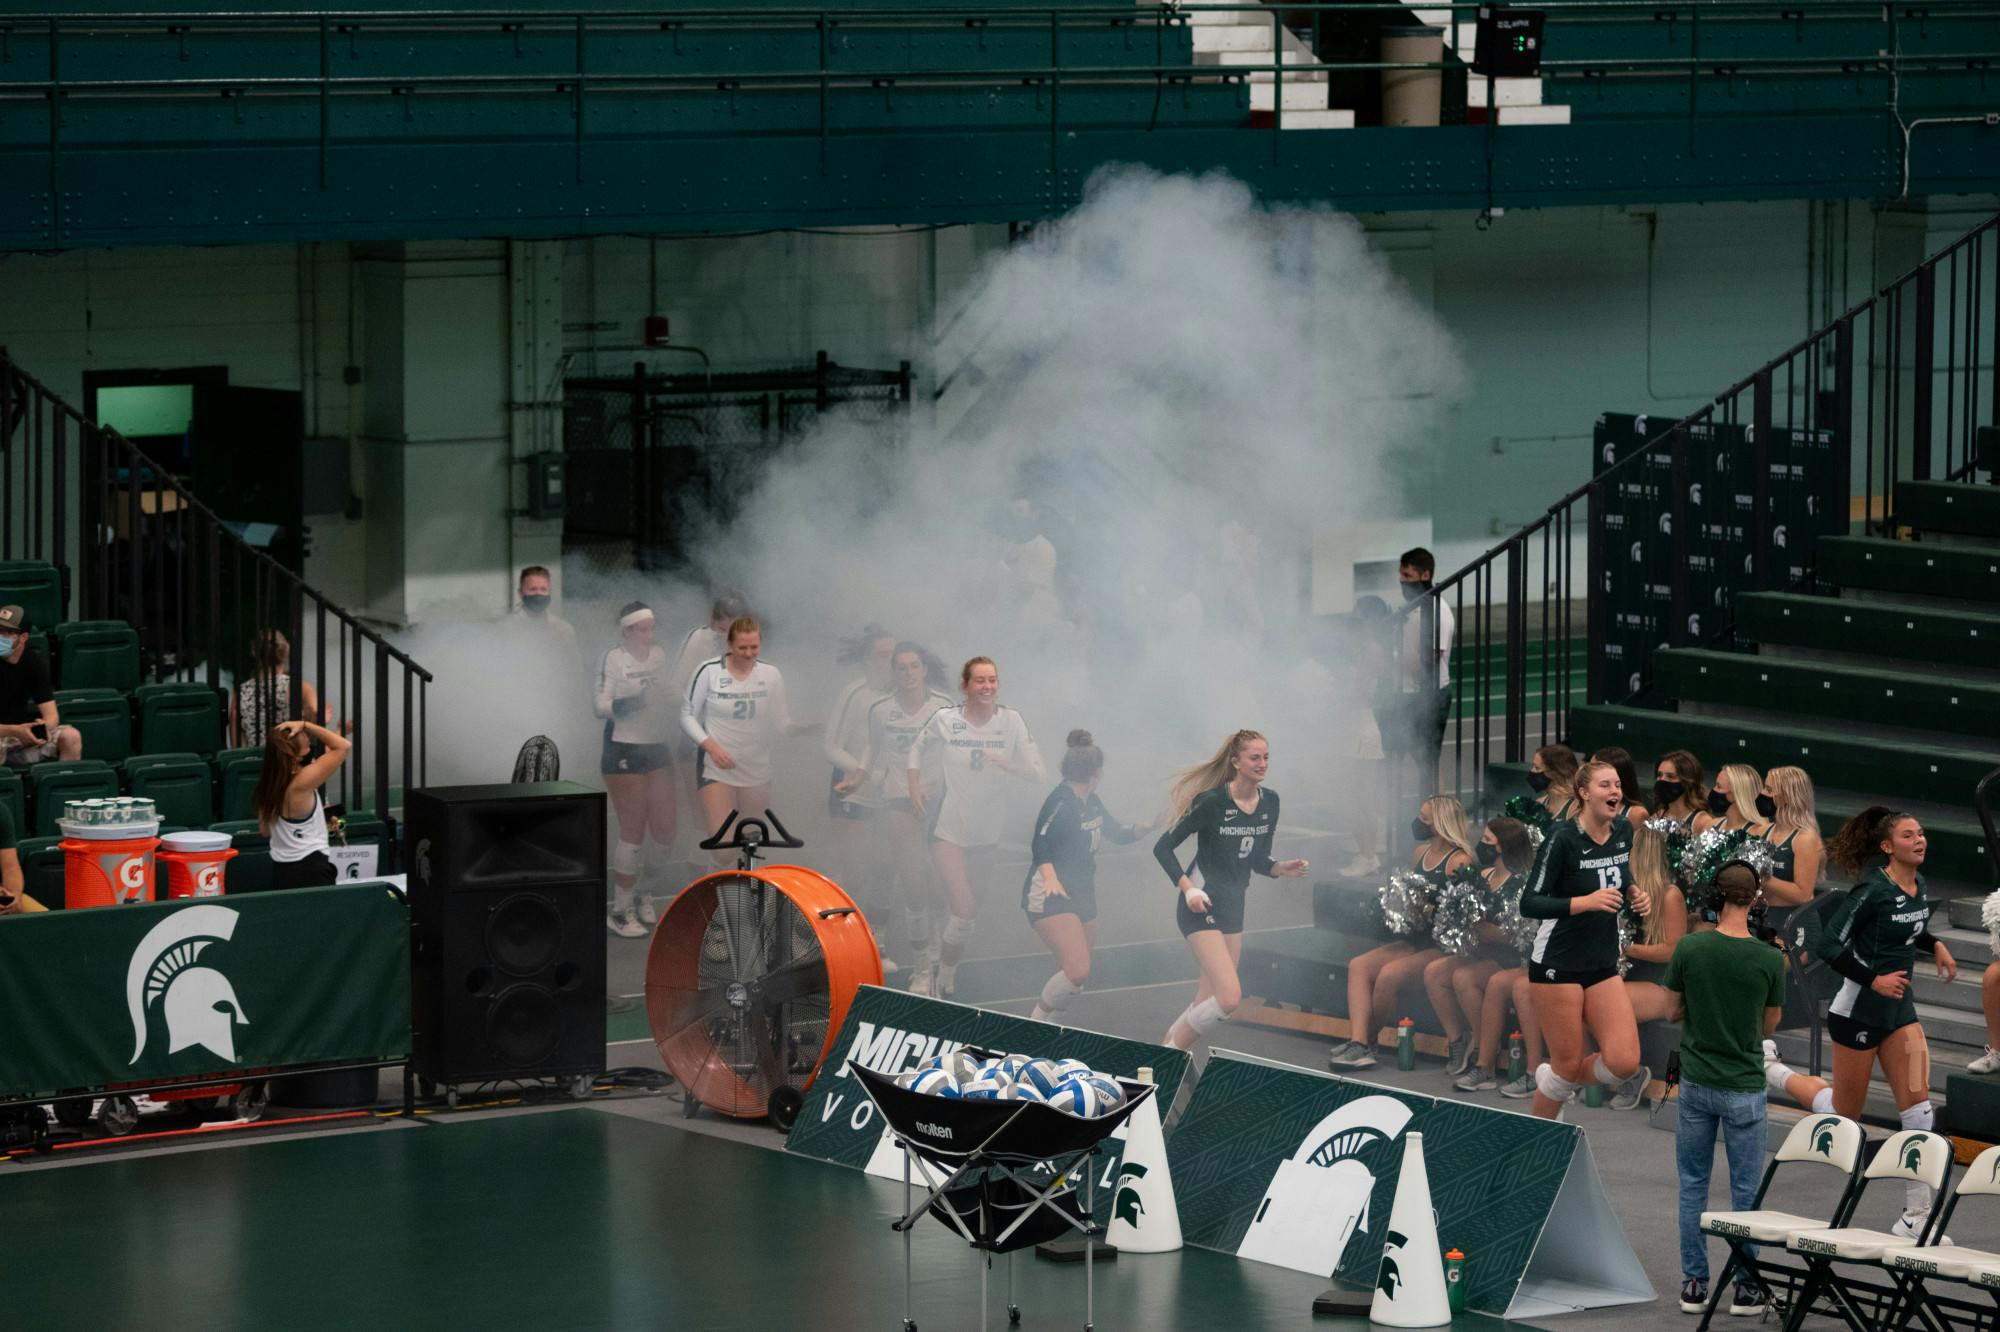 <p>The MSU Volleyball team kicked off their season with the Green versus White scrimmage on Aug. 21, 2021.</p>